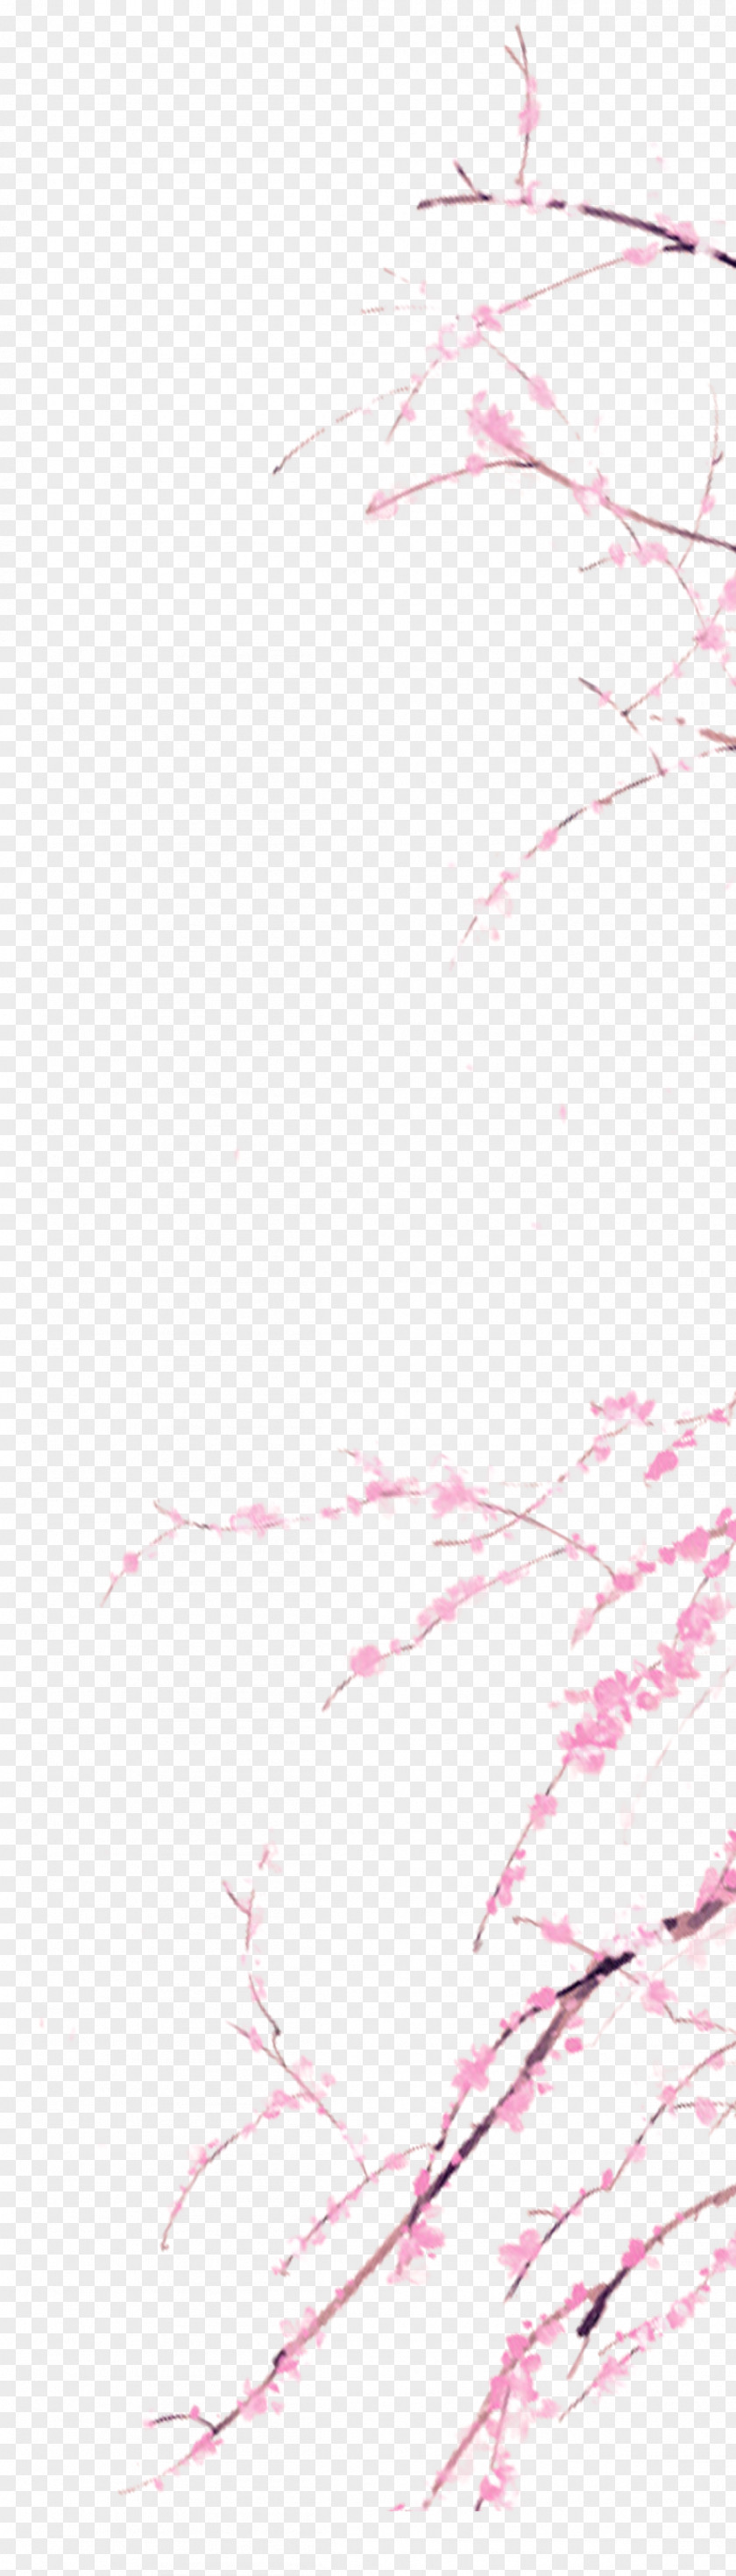 Pink Watercolor Peach Branches Decorative Patterns Painting PNG